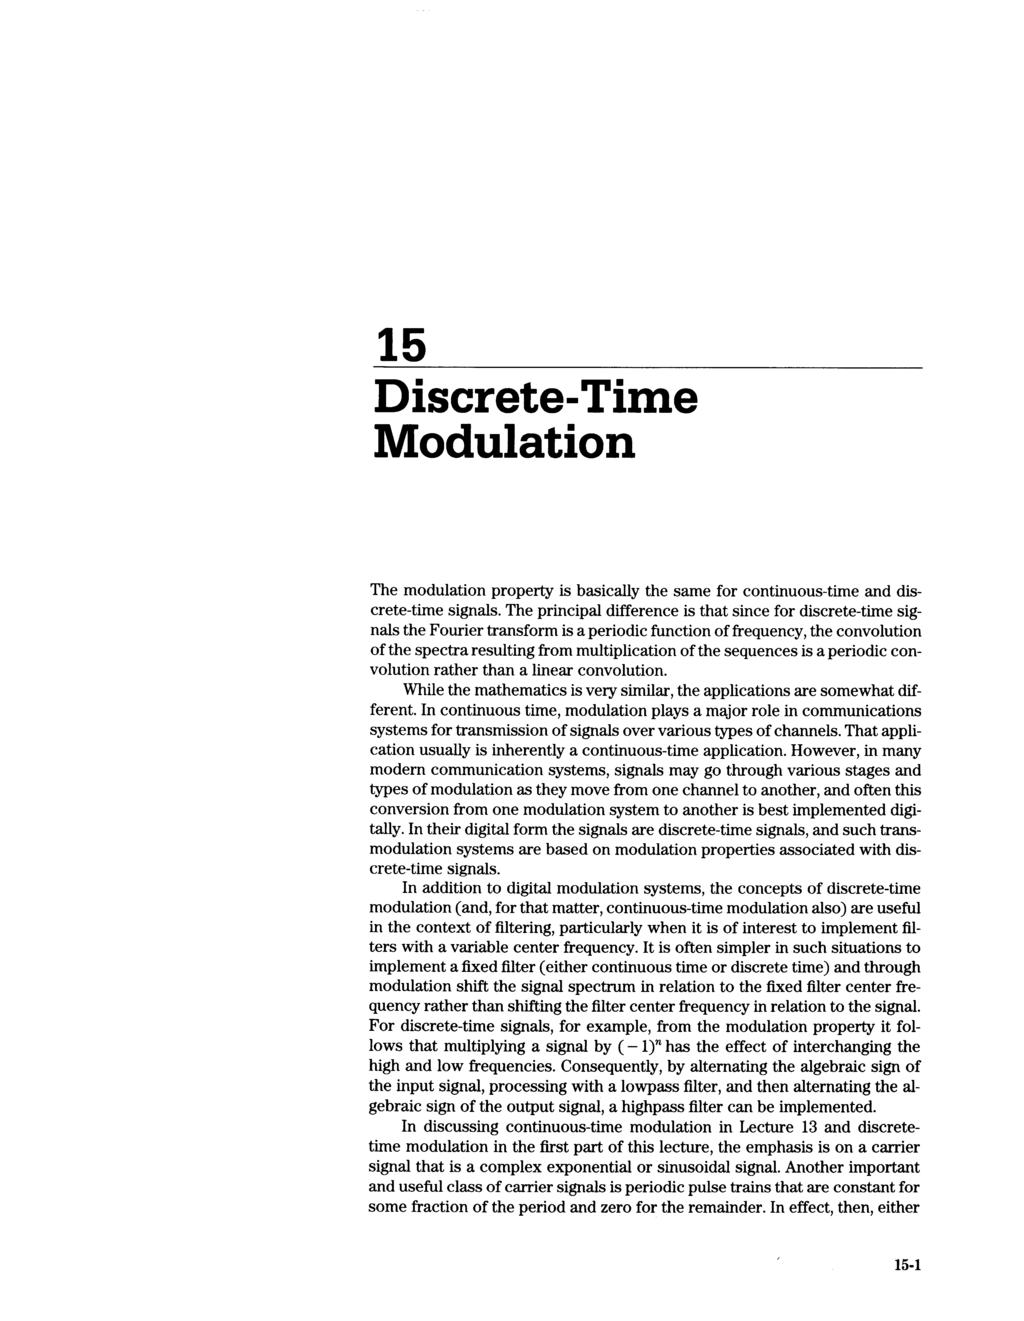 15 Discrete-Time Modulation The modulation property is basically the same for continuous-time and discrete-time signals.